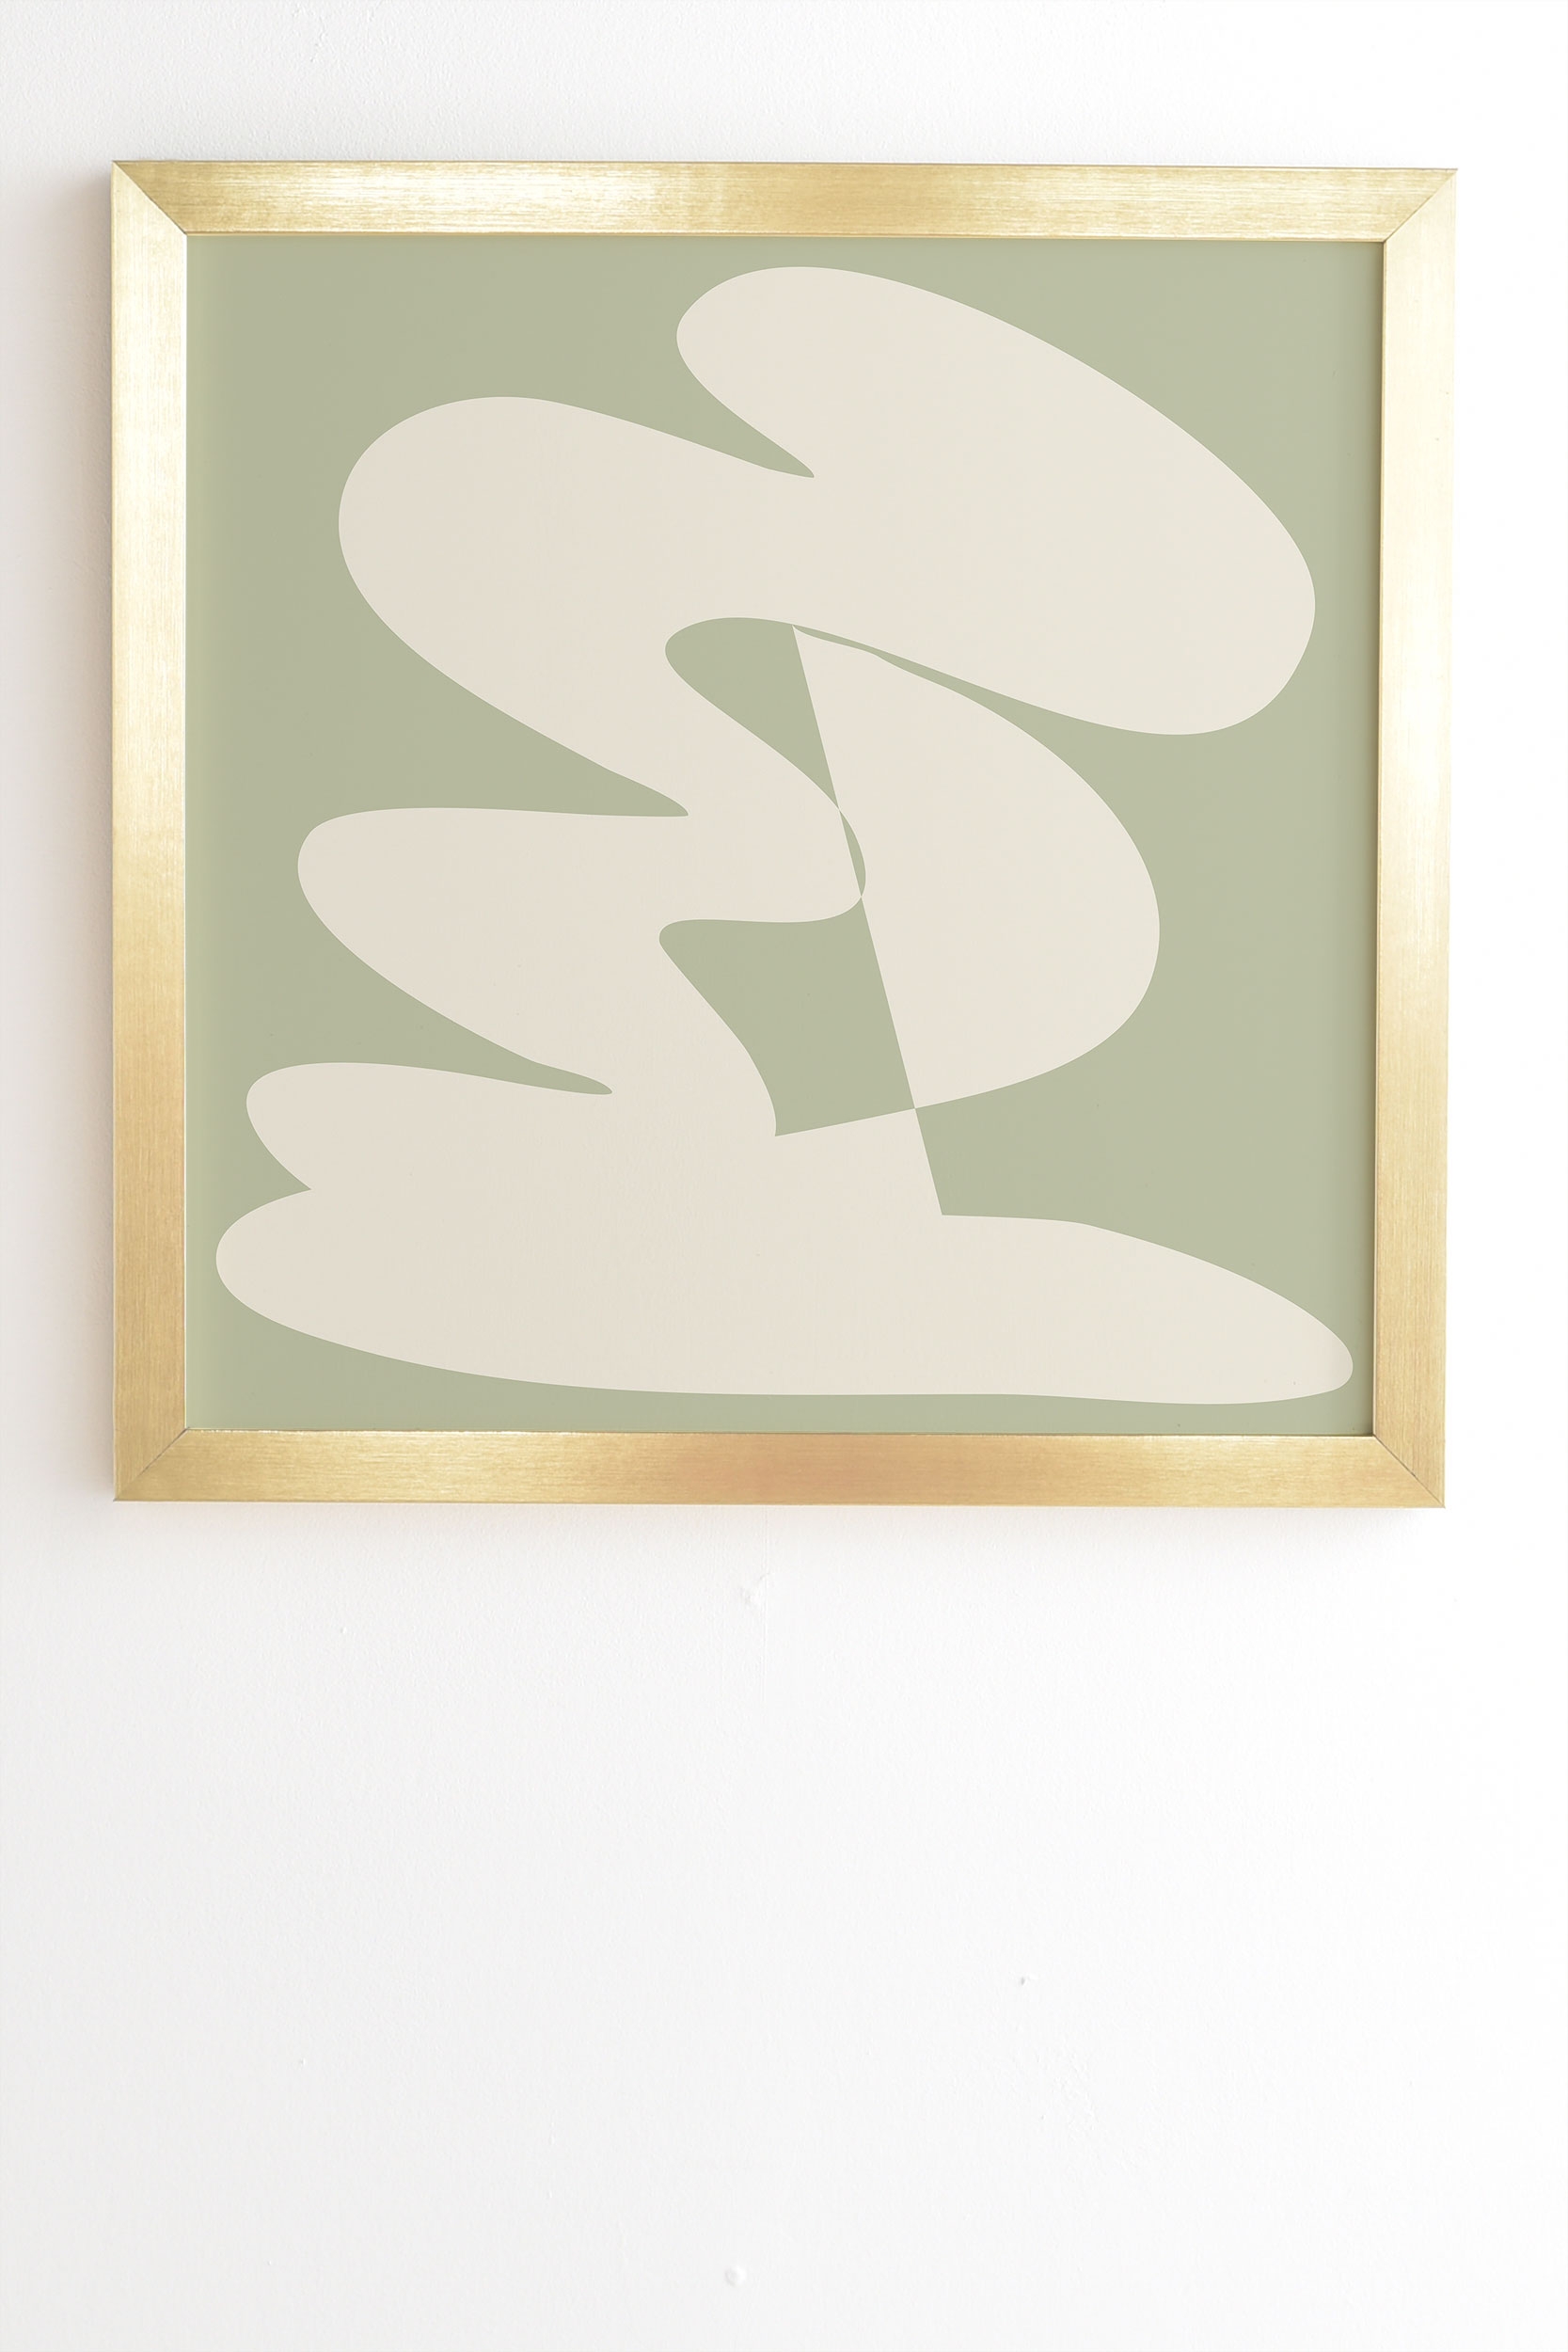 Minimalist Modern Abstract Exp by June Journal - Framed Wall Art Basic Gold 12" x 12" - Image 1